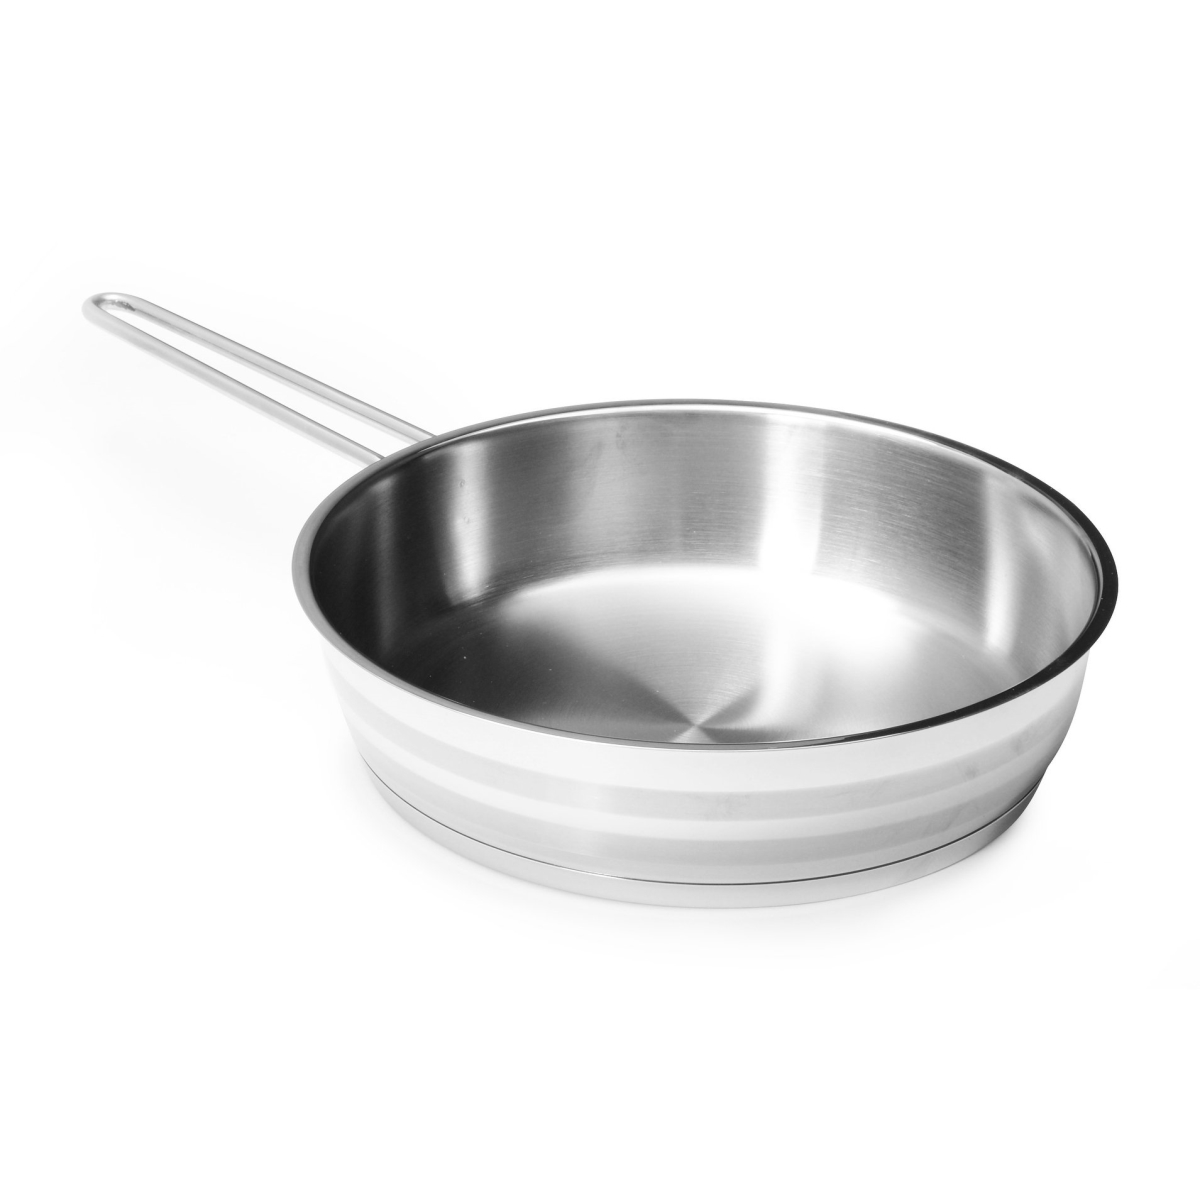 Korkmaz A1905 9.5 In. Classic 18 By 10 Stainless Steel Deep Frying Stir Fry Pan